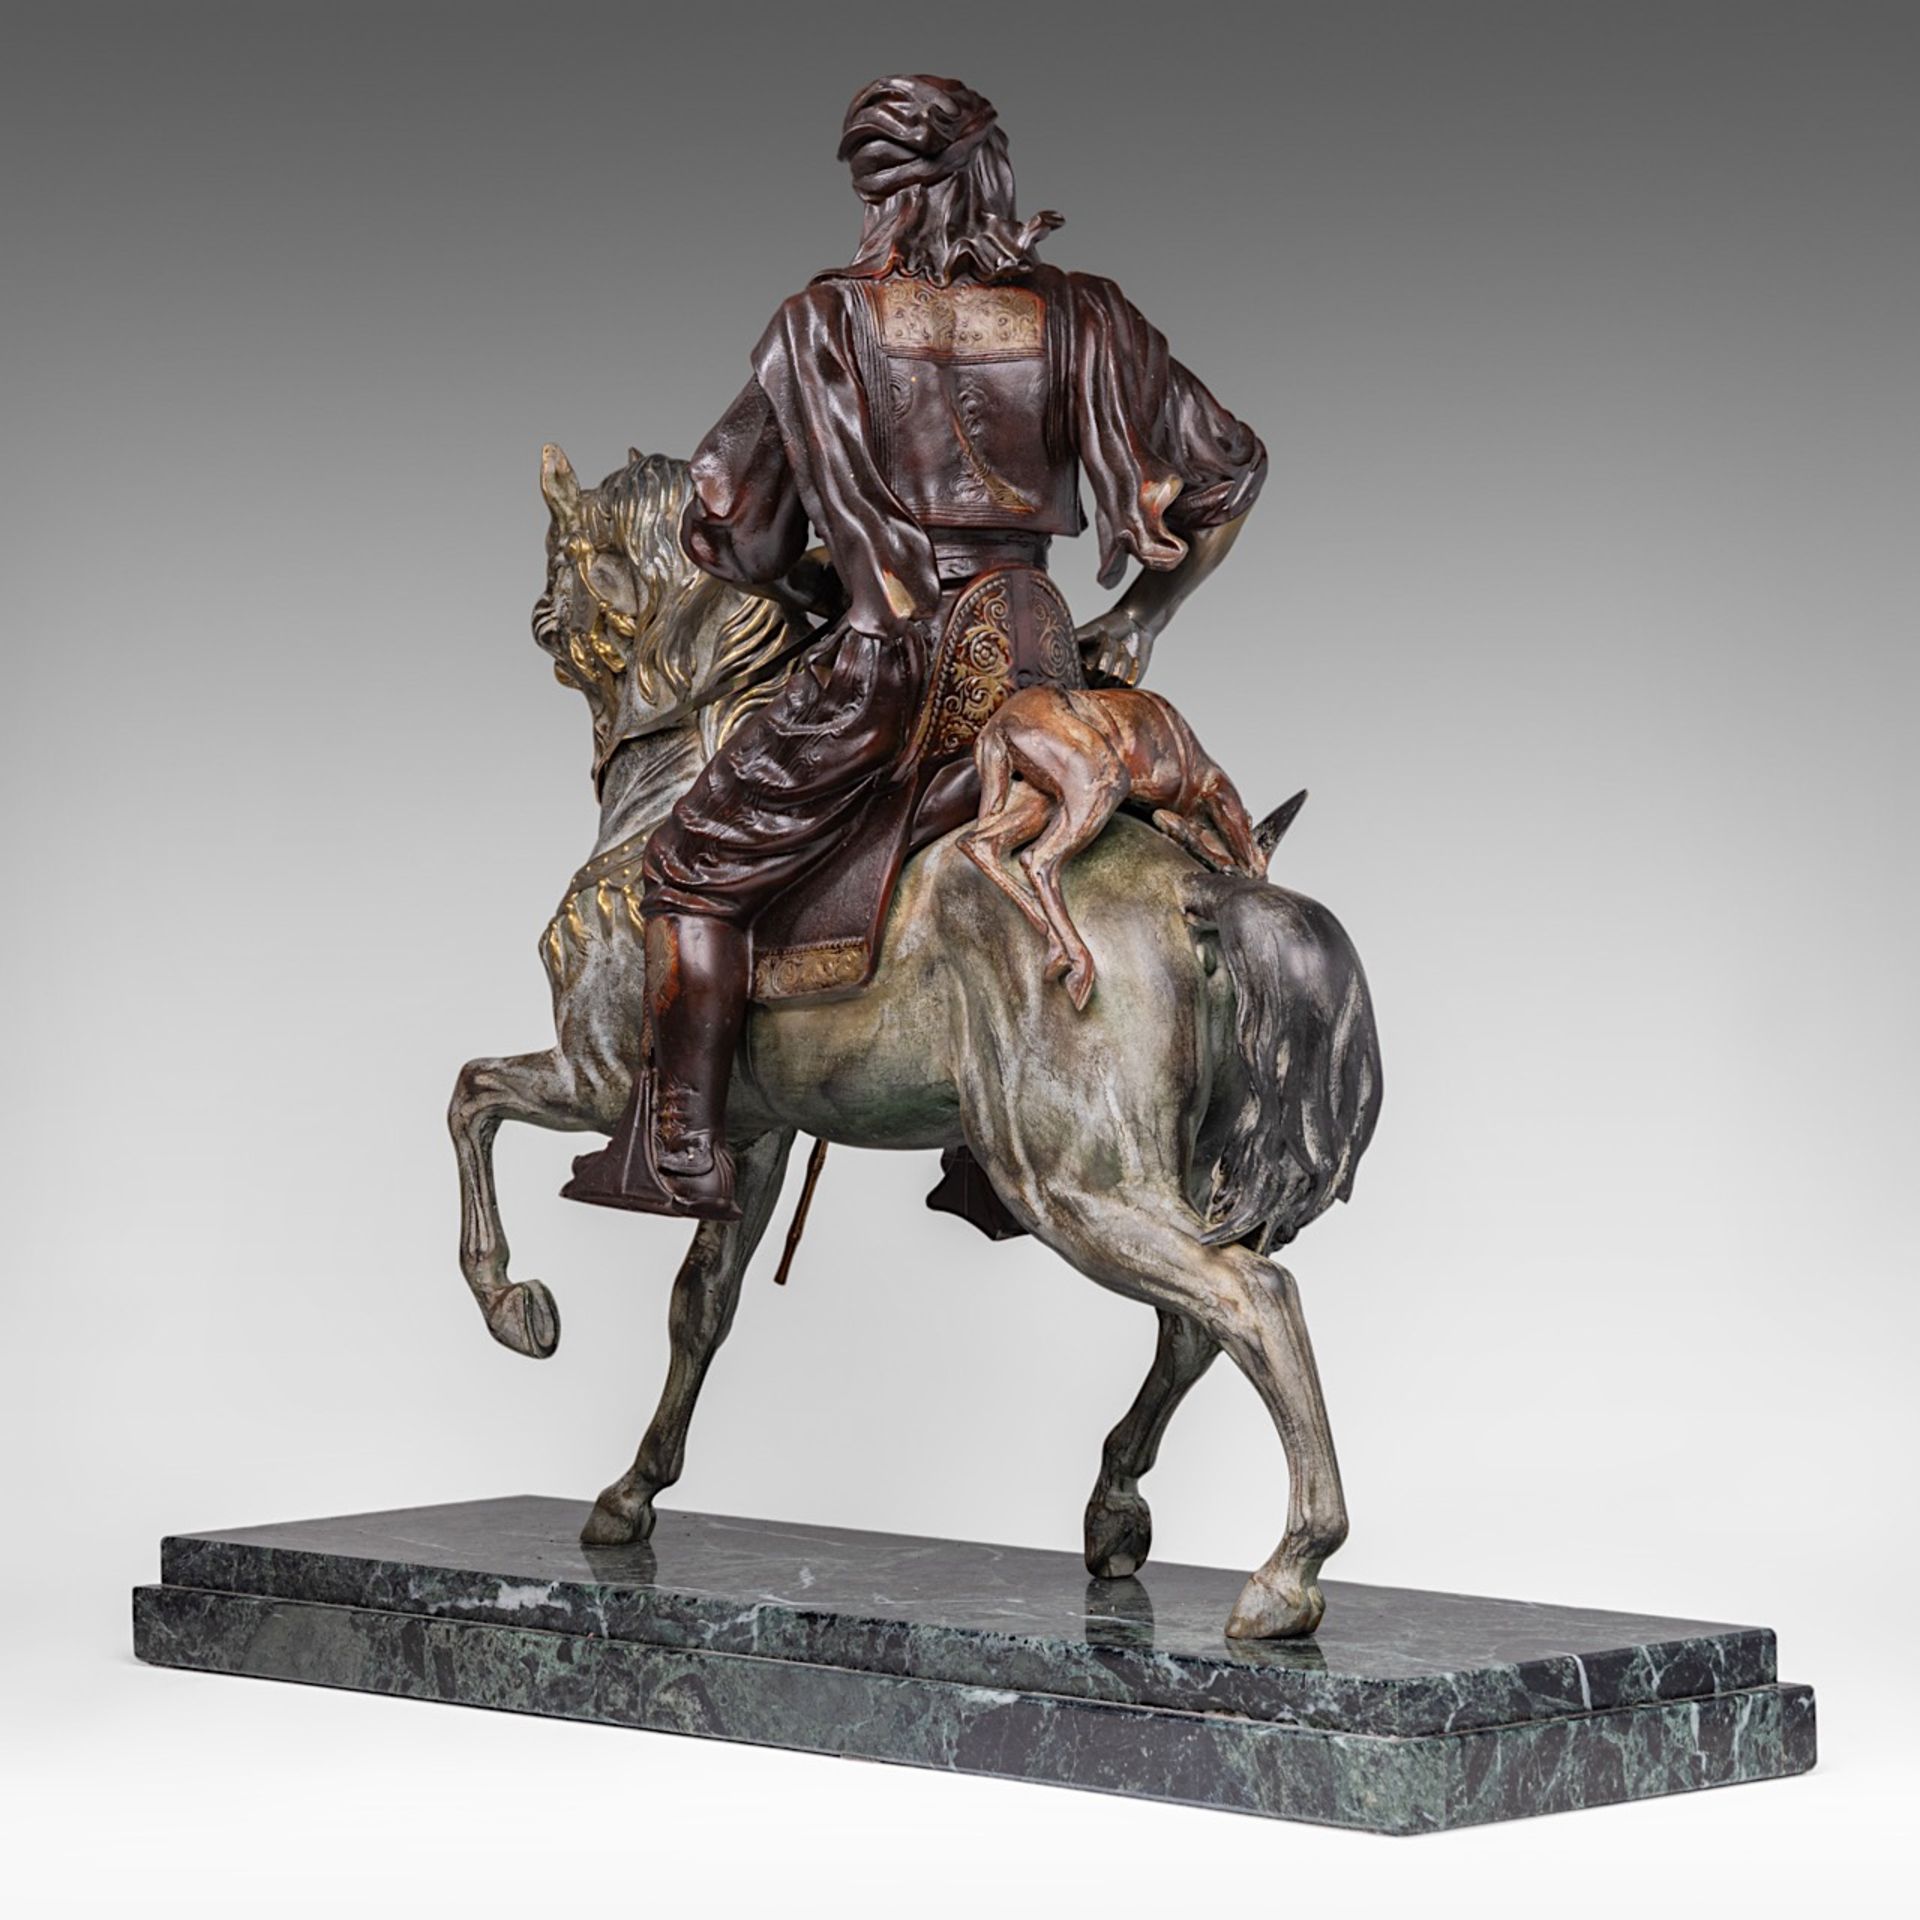 Attrib. to Alfred Barye (1839-1882), Arab horseman, patinated spelter on a vert de mer marble base, - Image 7 of 10